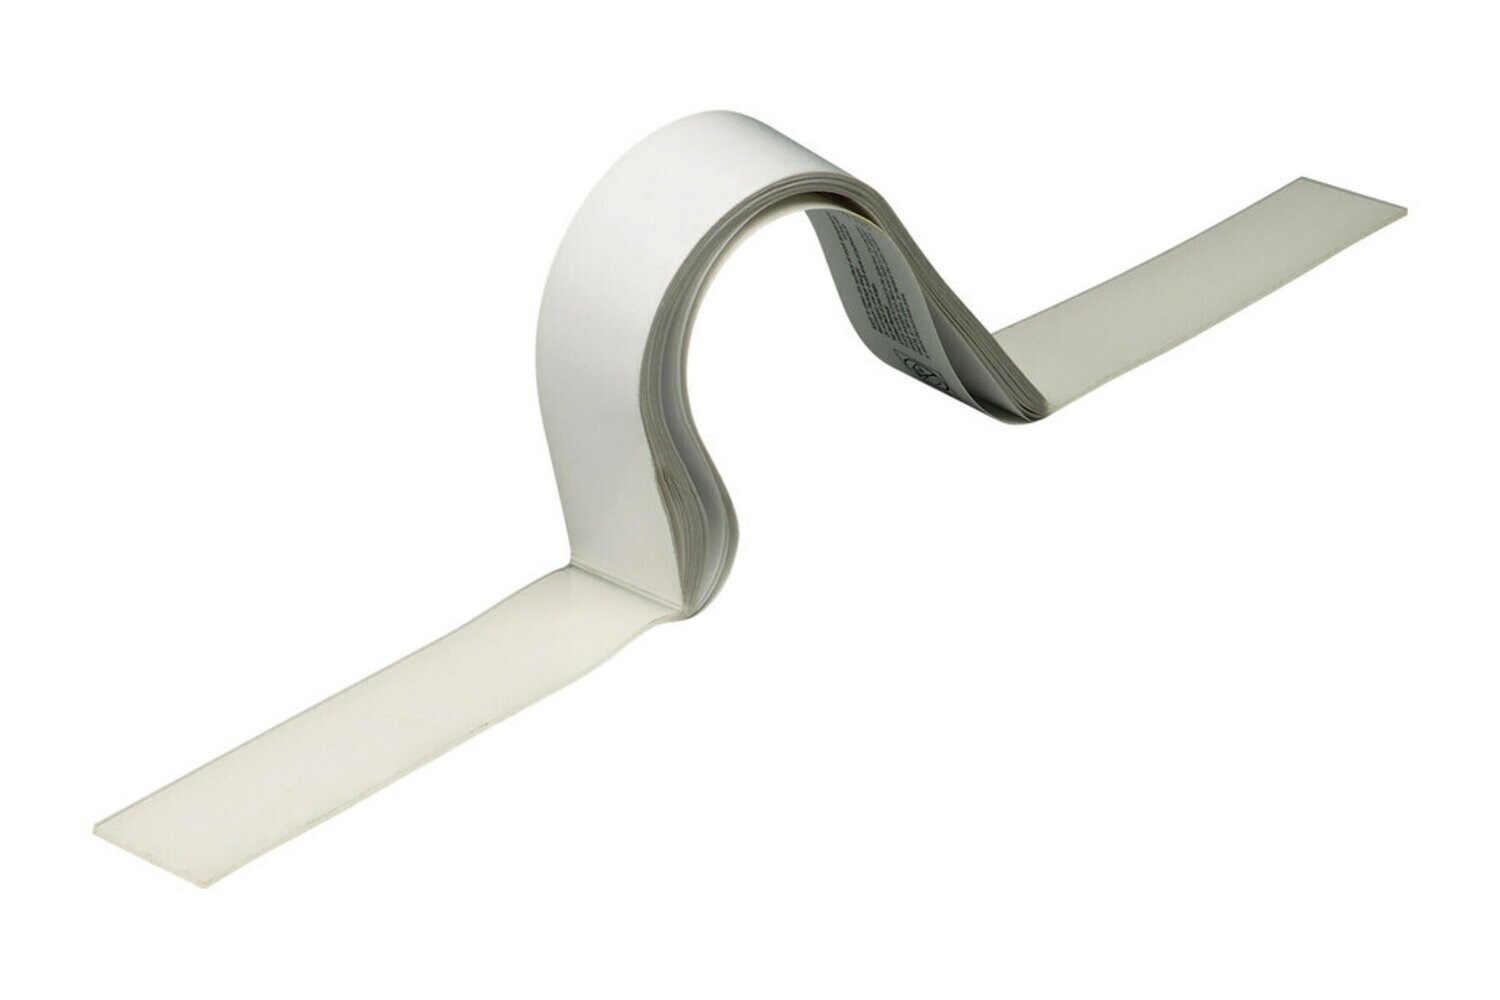 7100045461 - 3M Carry Handle 8330, White, 1-3/8 in x 38 in x 6 in, (25 Handle/Pad)
Case